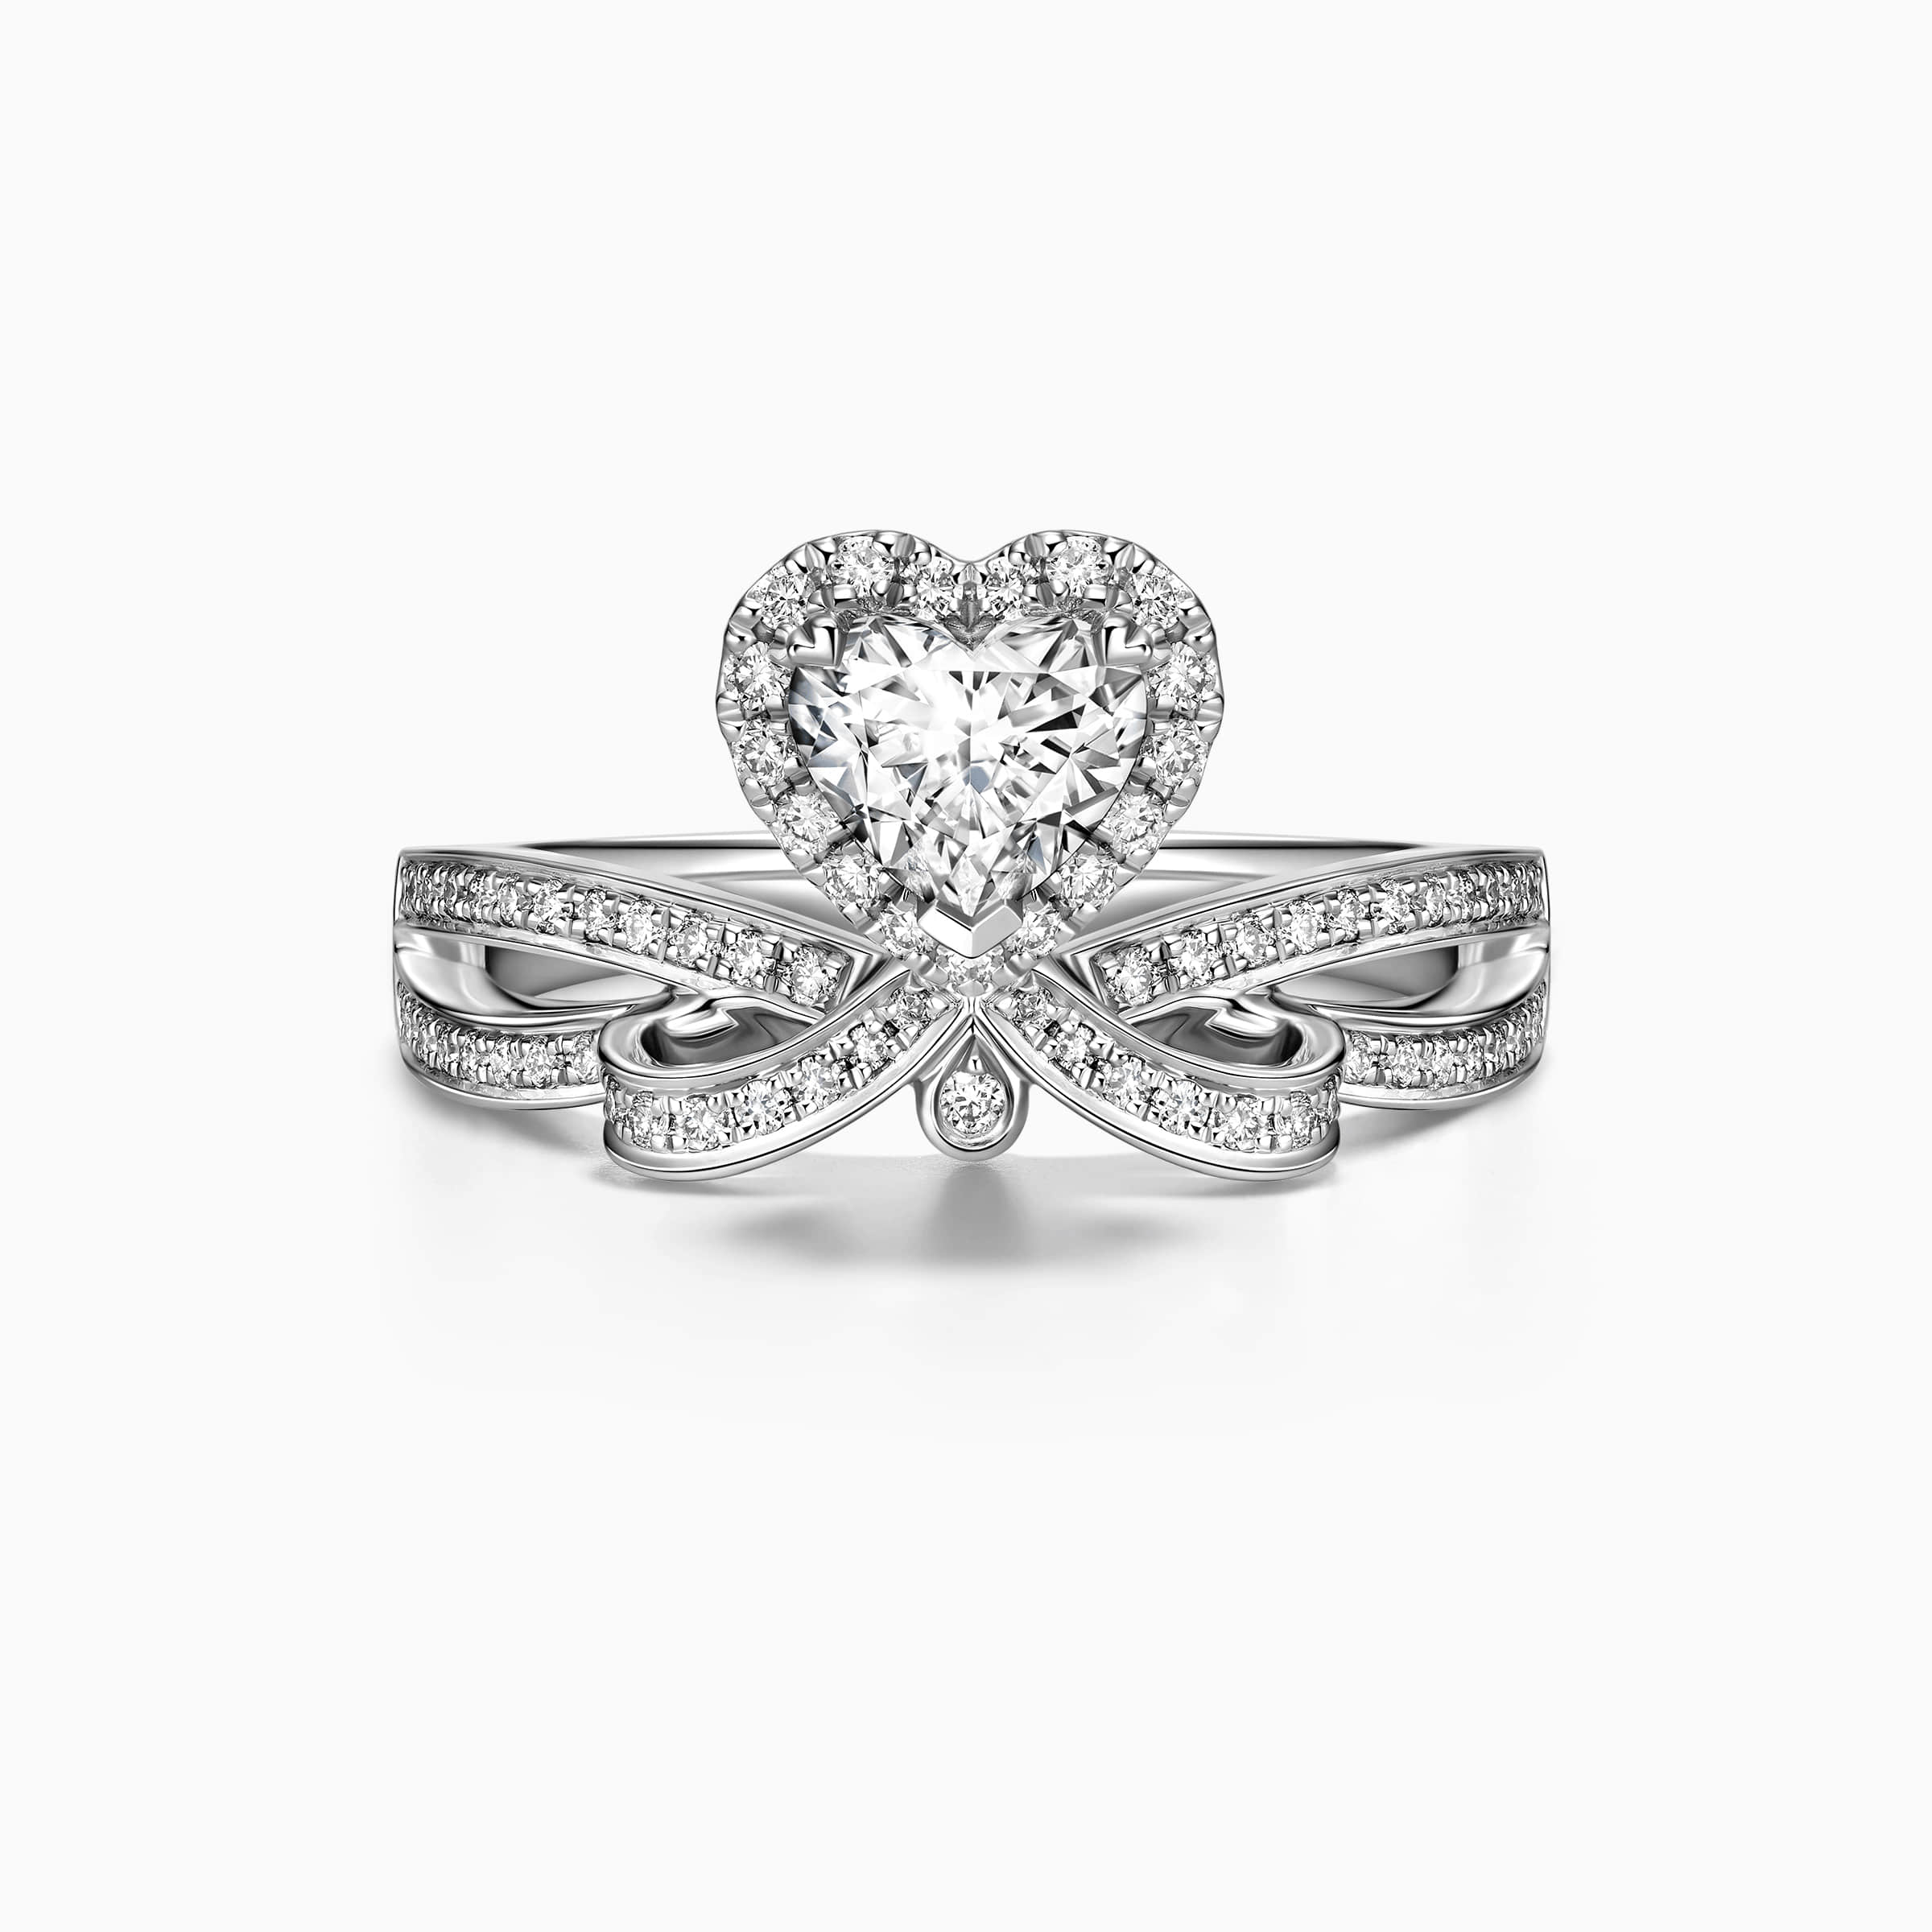 Darry Ring crown engagement ring in white gold